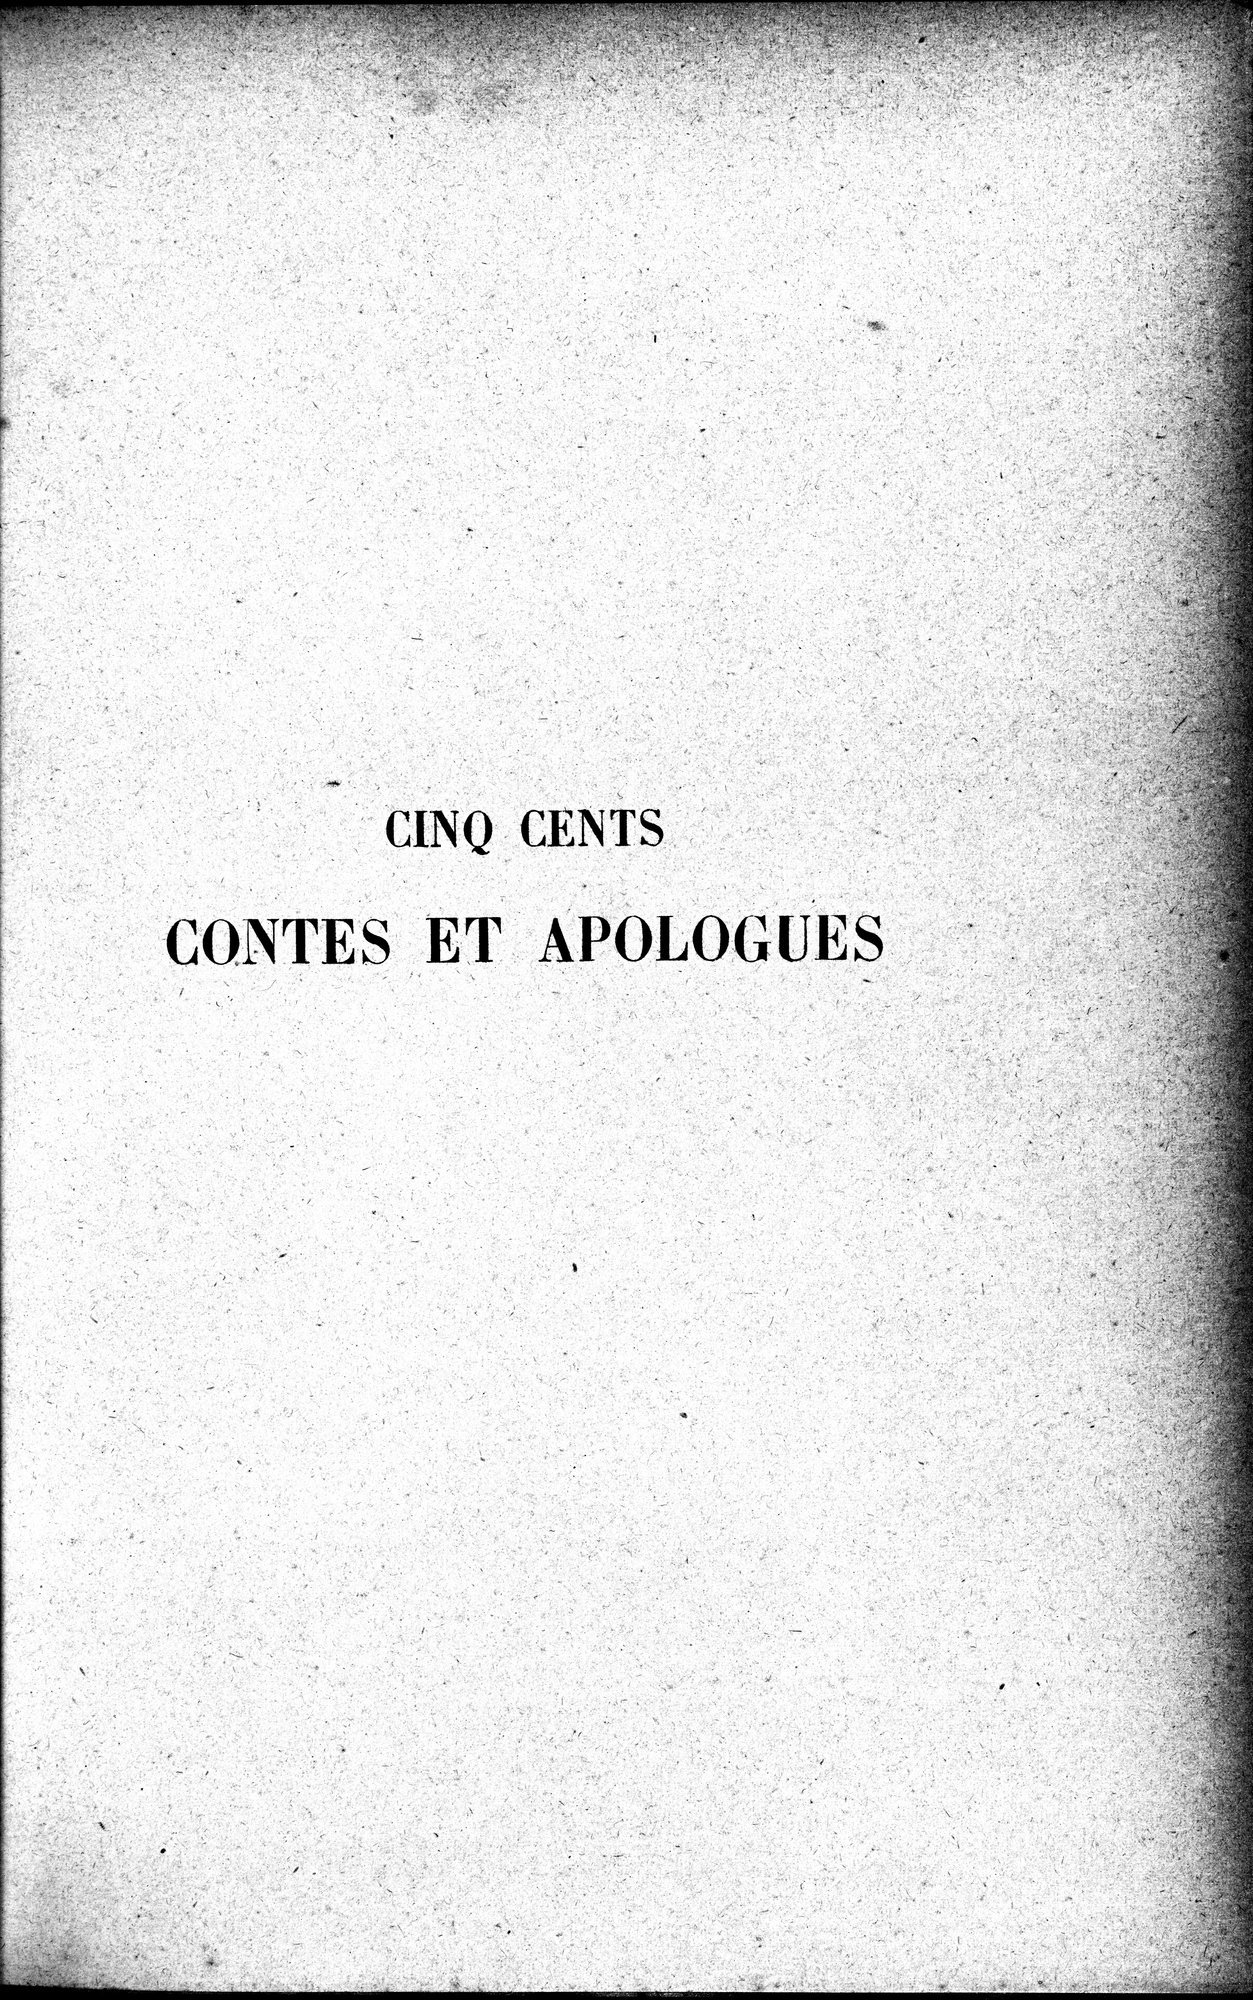 Cinq Cents Contes et Apologues : vol.1 / Page 11 (Grayscale High Resolution Image)